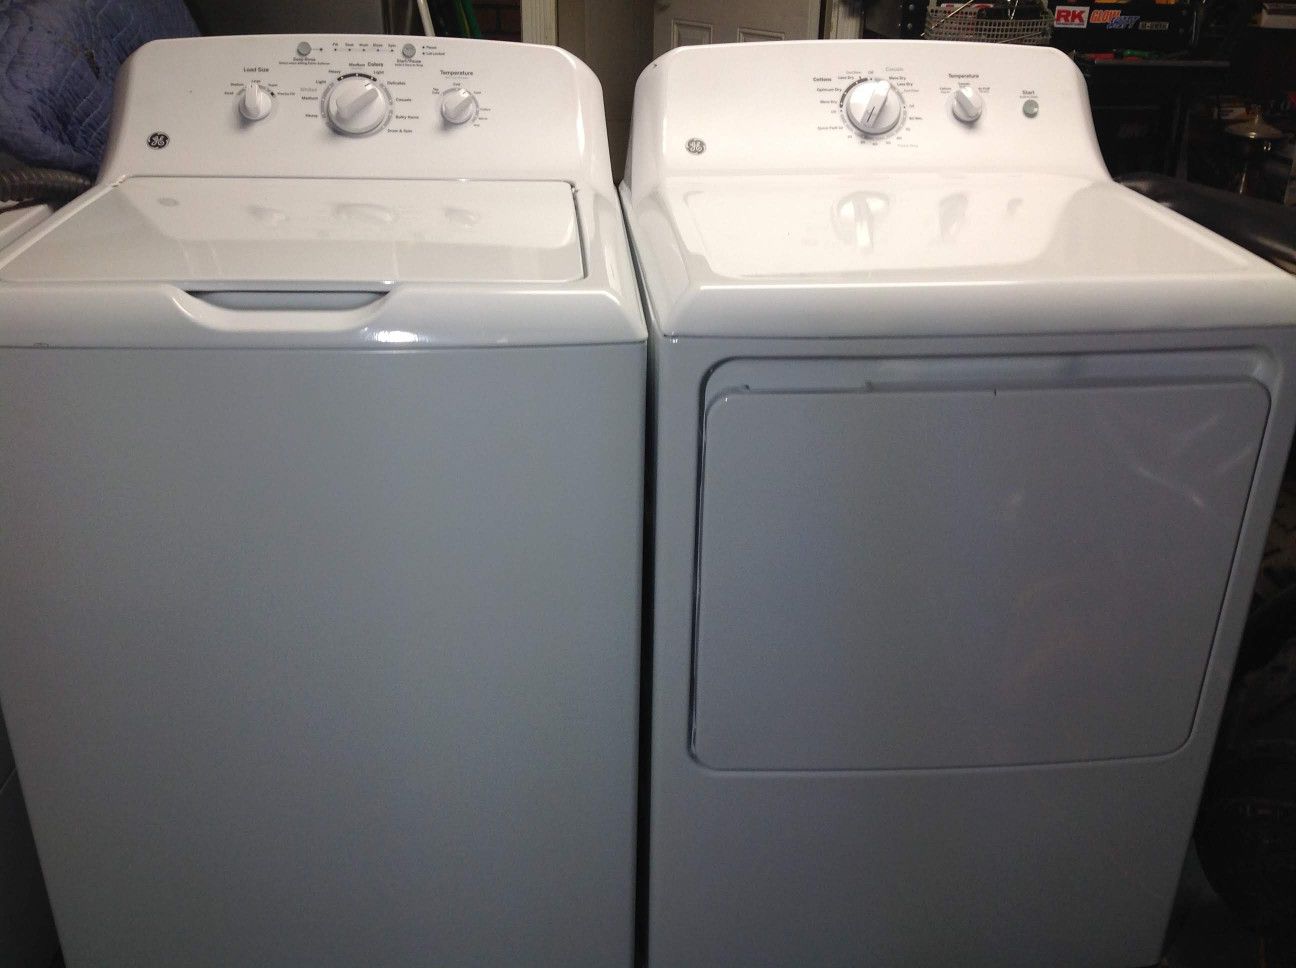 Matching 2019 Model GE Washer and Dryer Set (MINT/LIKE NEW)